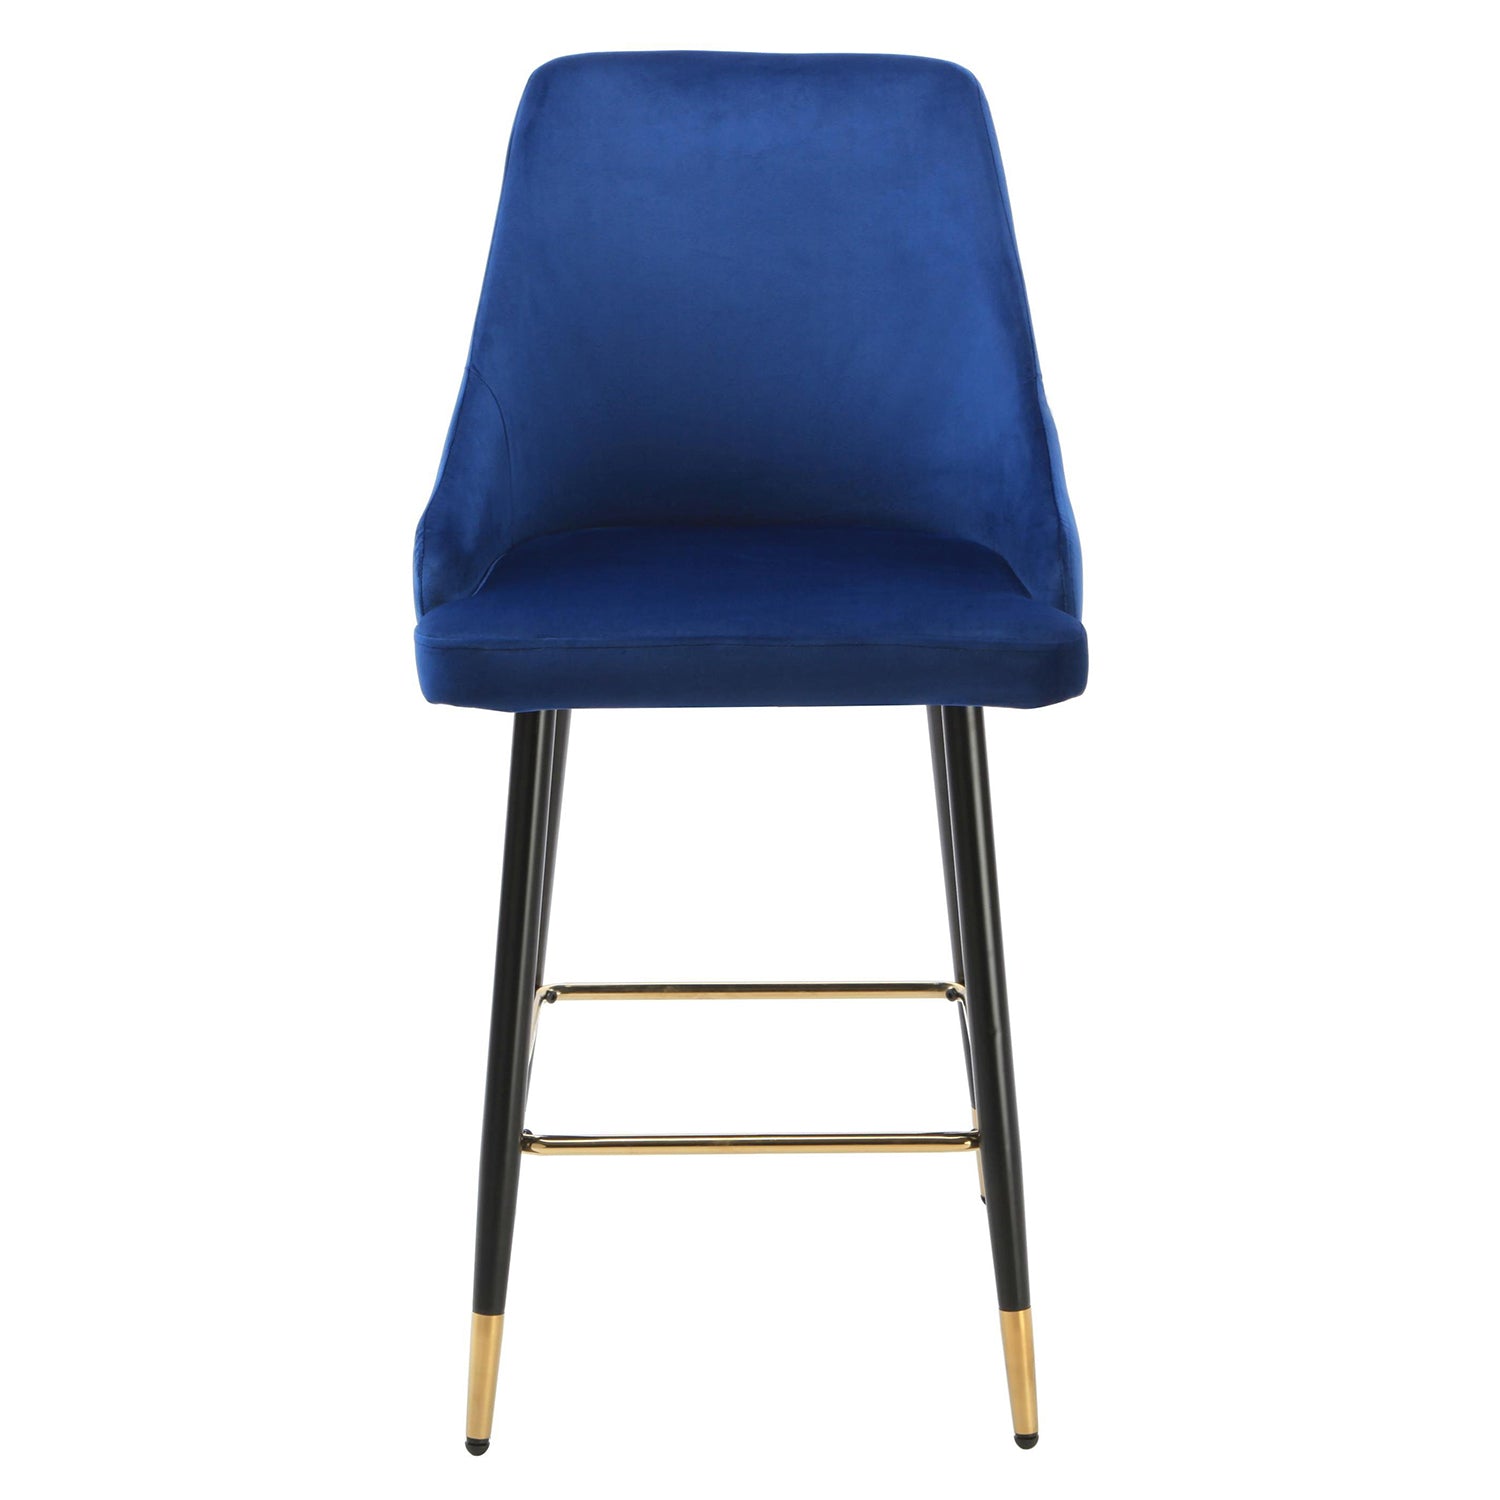 2 Set chesterfield navy blue kitchen bar stool by Native